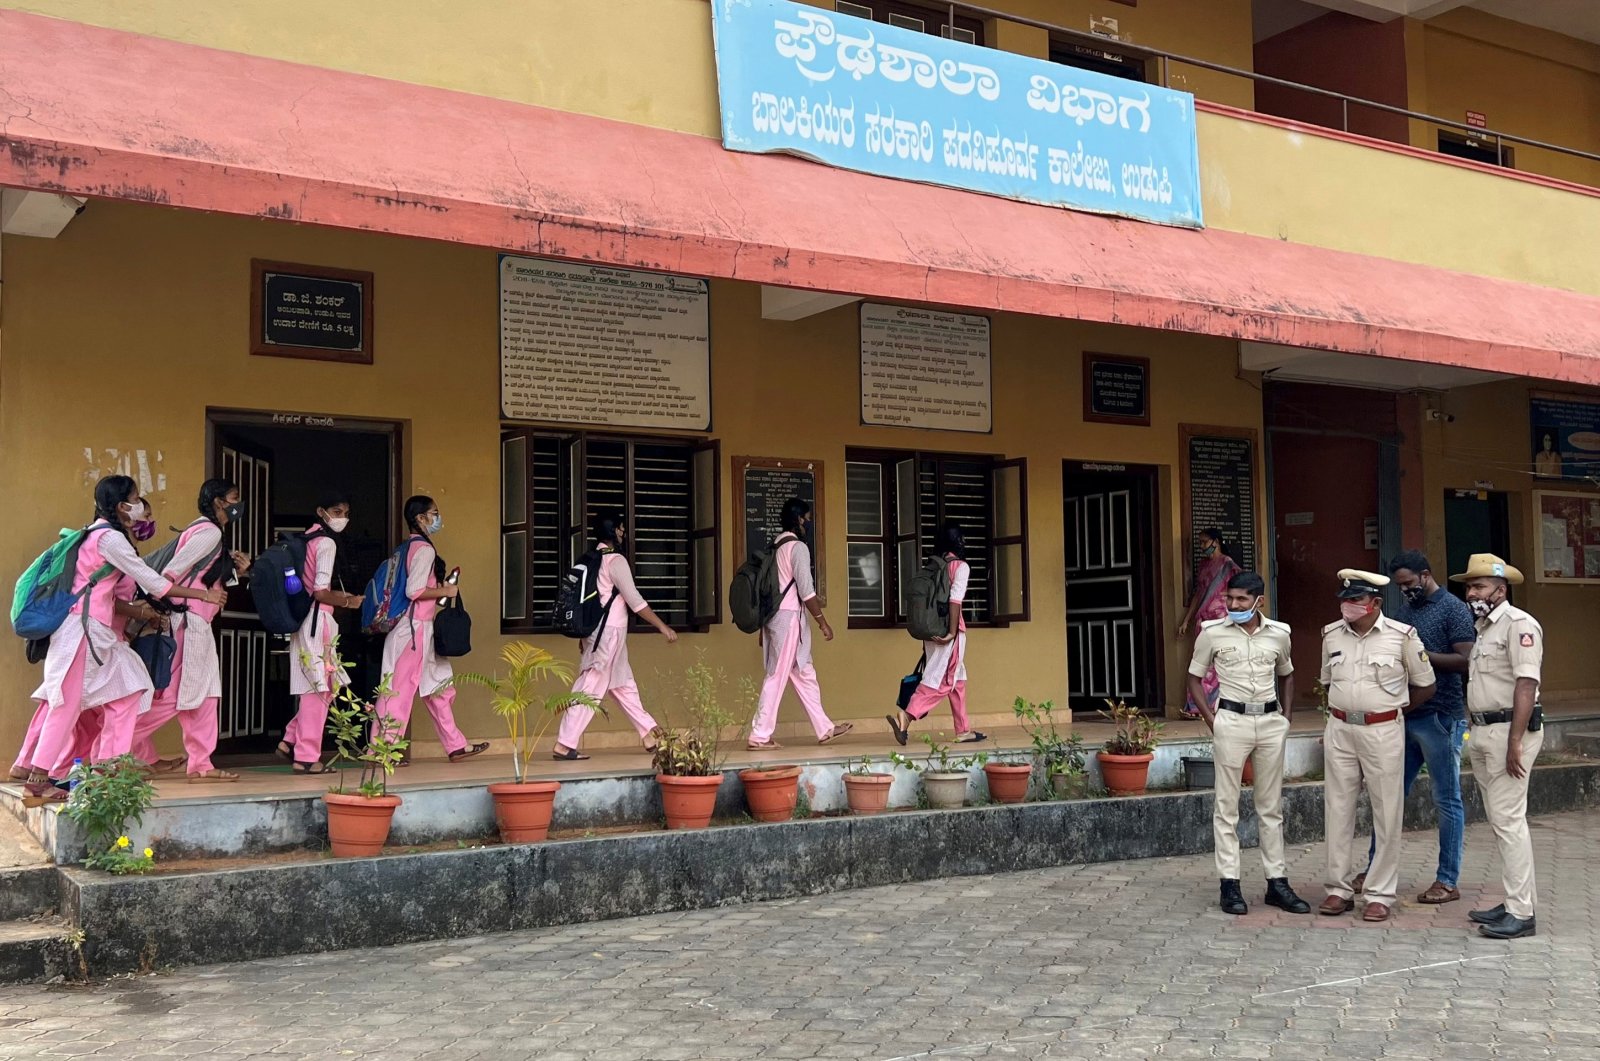 Schoolgirls arrive to attend classes as police officers stand inside the premises of a government girls school after the recent hijab ban, in Udupi town in the southern state of Karnataka, India, Feb. 14, 2022. (Reuters Photo)